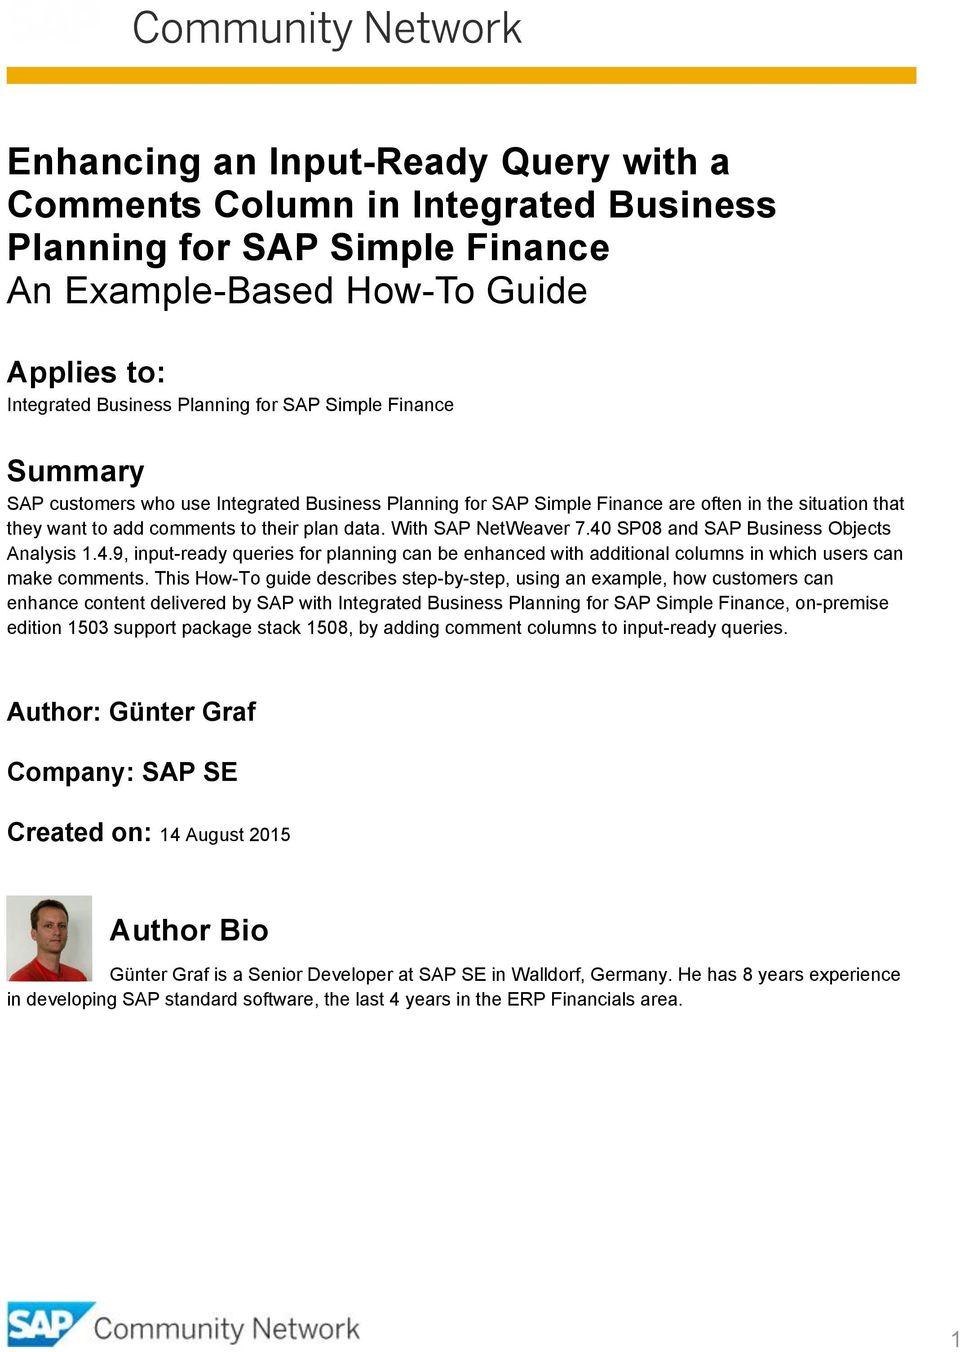 40 SP08 and SAP Business Objects Analysis 1.4.9, input-ready queries fr planning can be enhanced with additinal clumns in which users can make cmments.